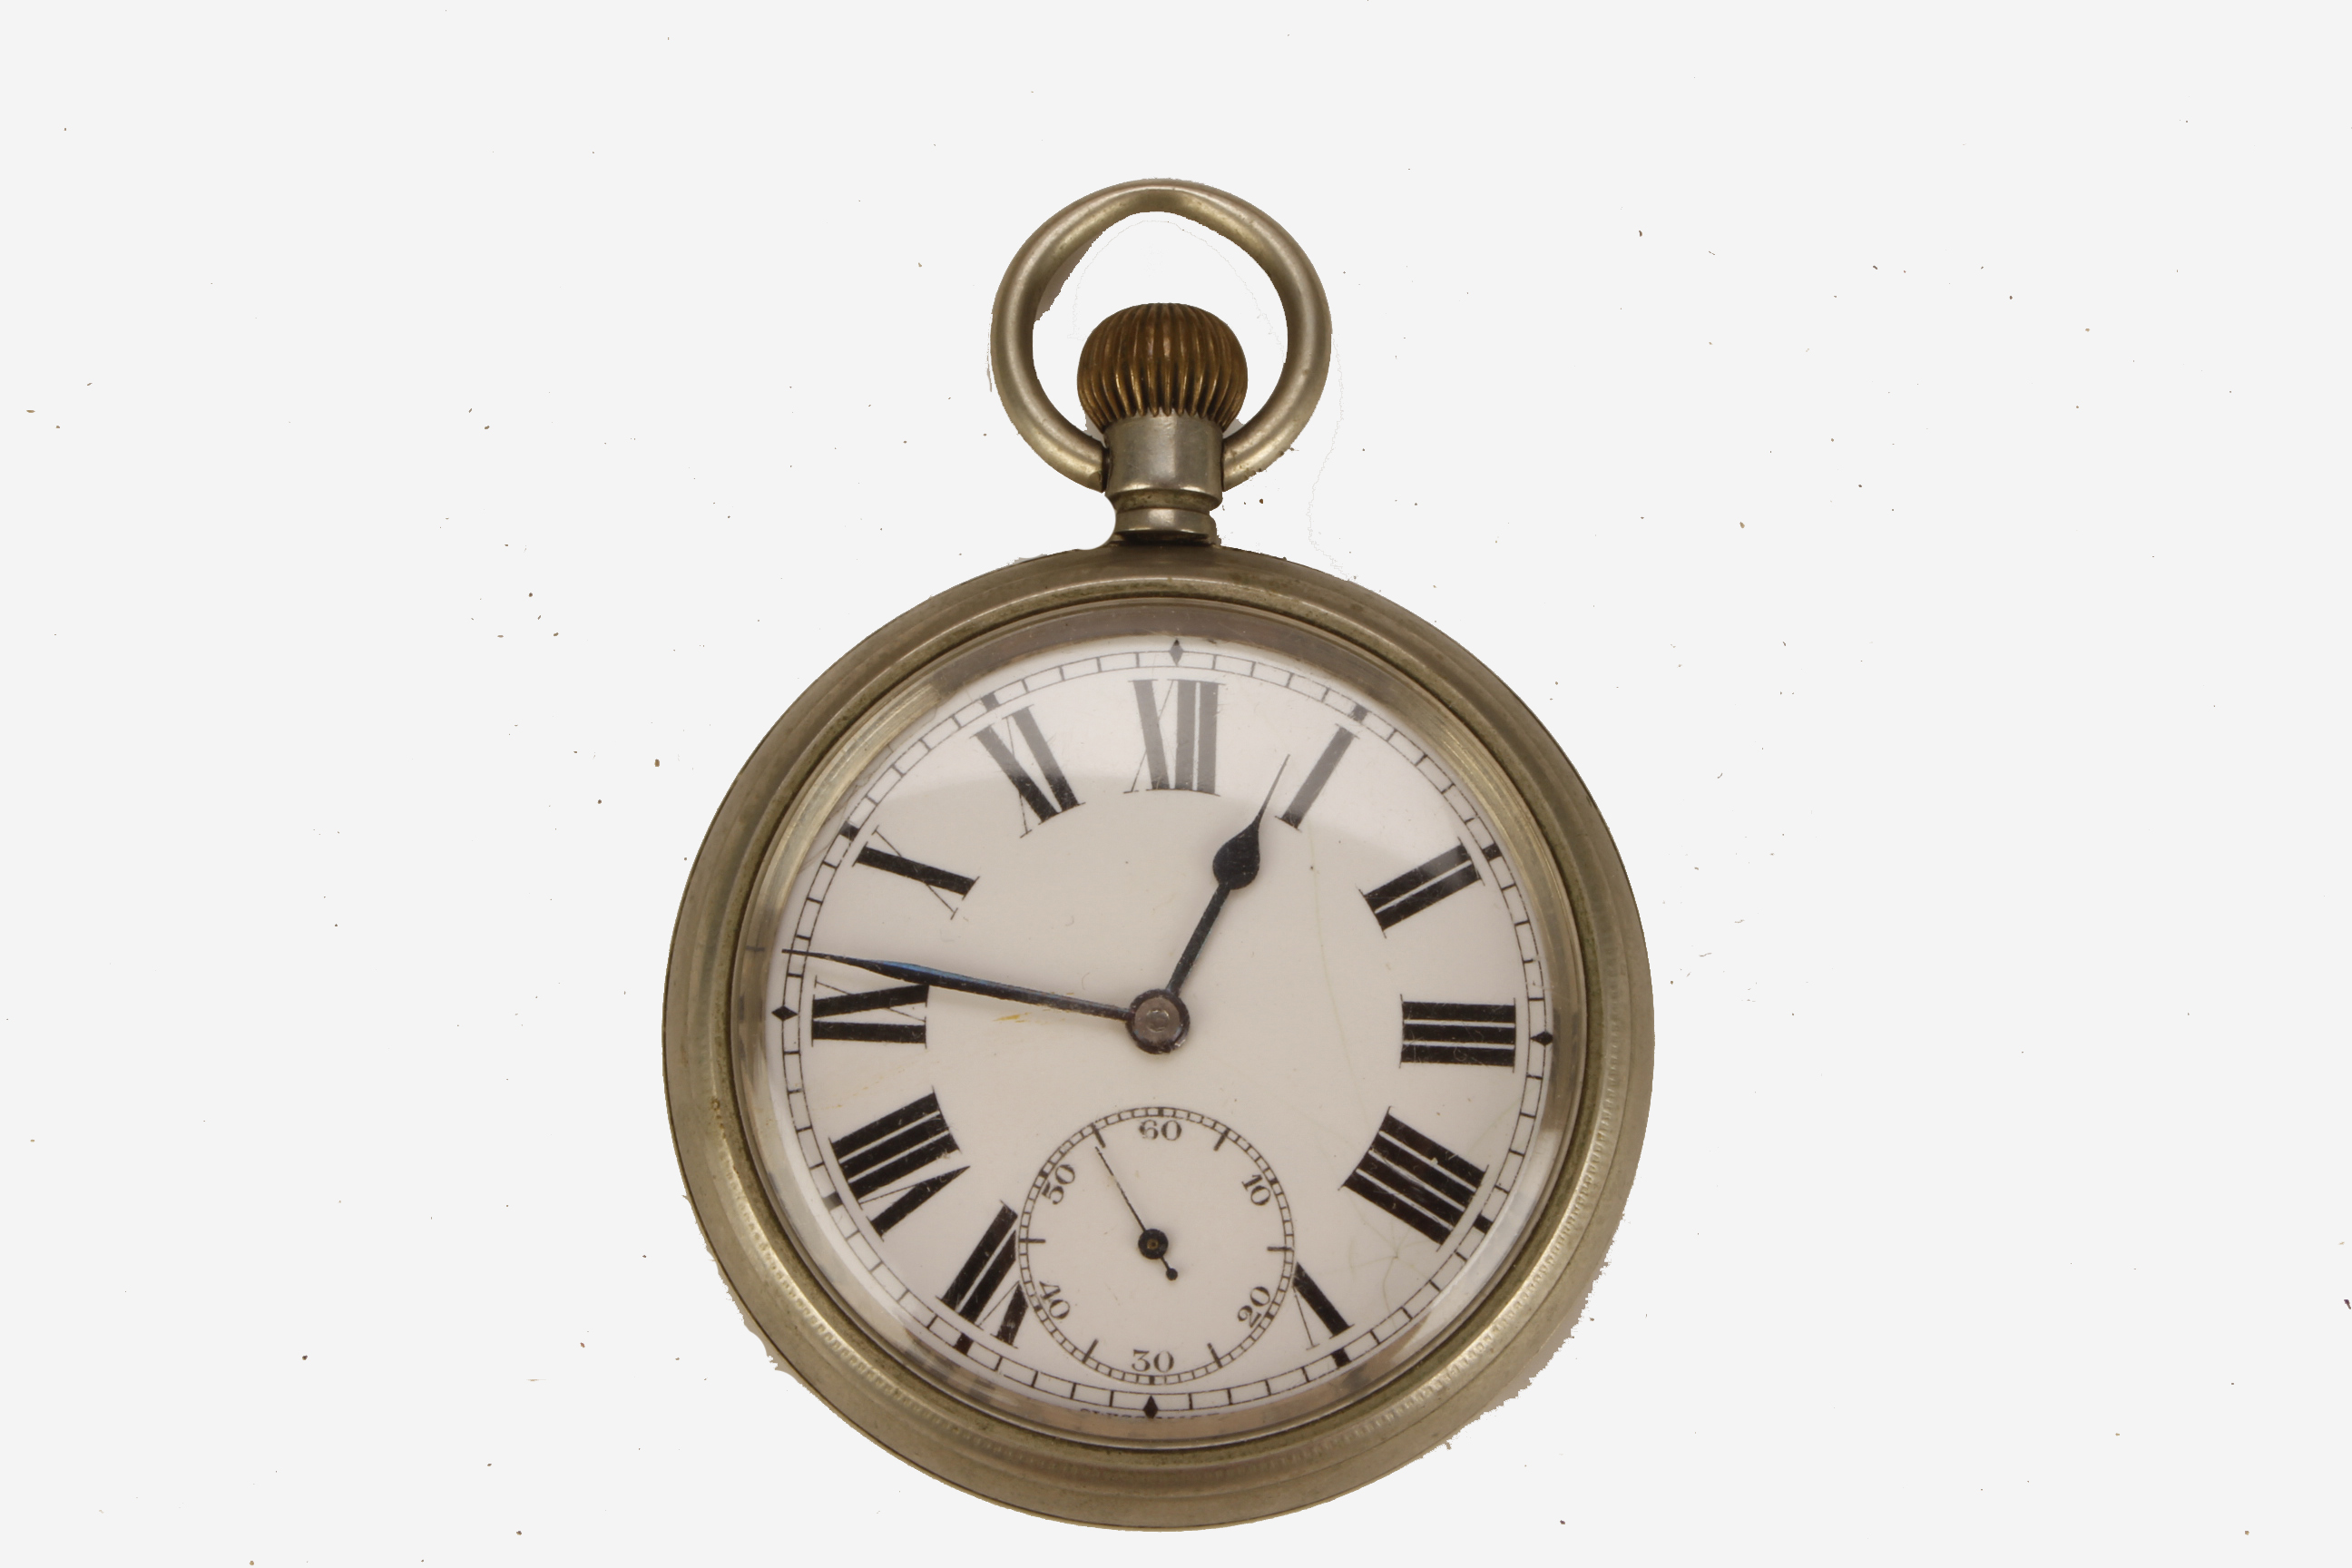 A LMS Pocket Watch, Swiss Made 15 Jewels, stamped LMS 14959 on back, in non related leather pouch,